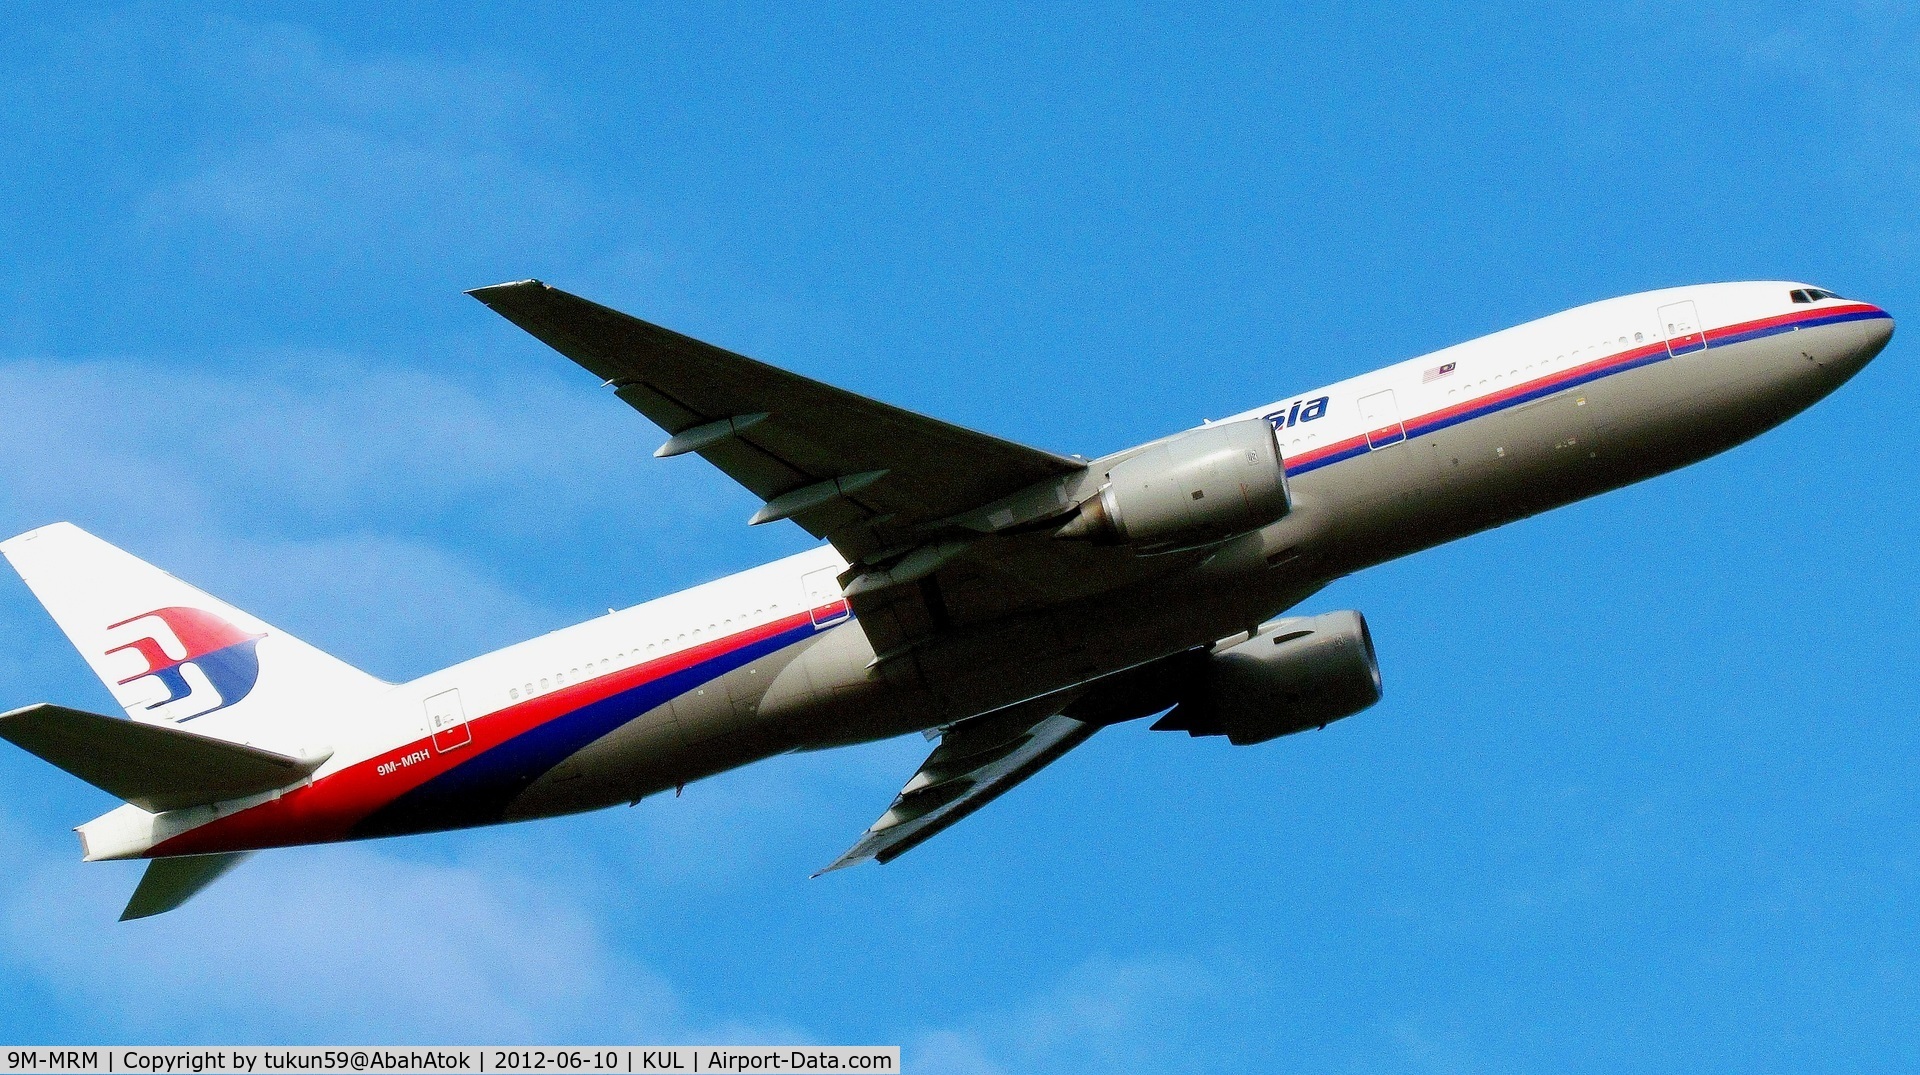 9M-MRM, 2001 Boeing 777-2H6/ER C/N 29066, Malaysia Airlines